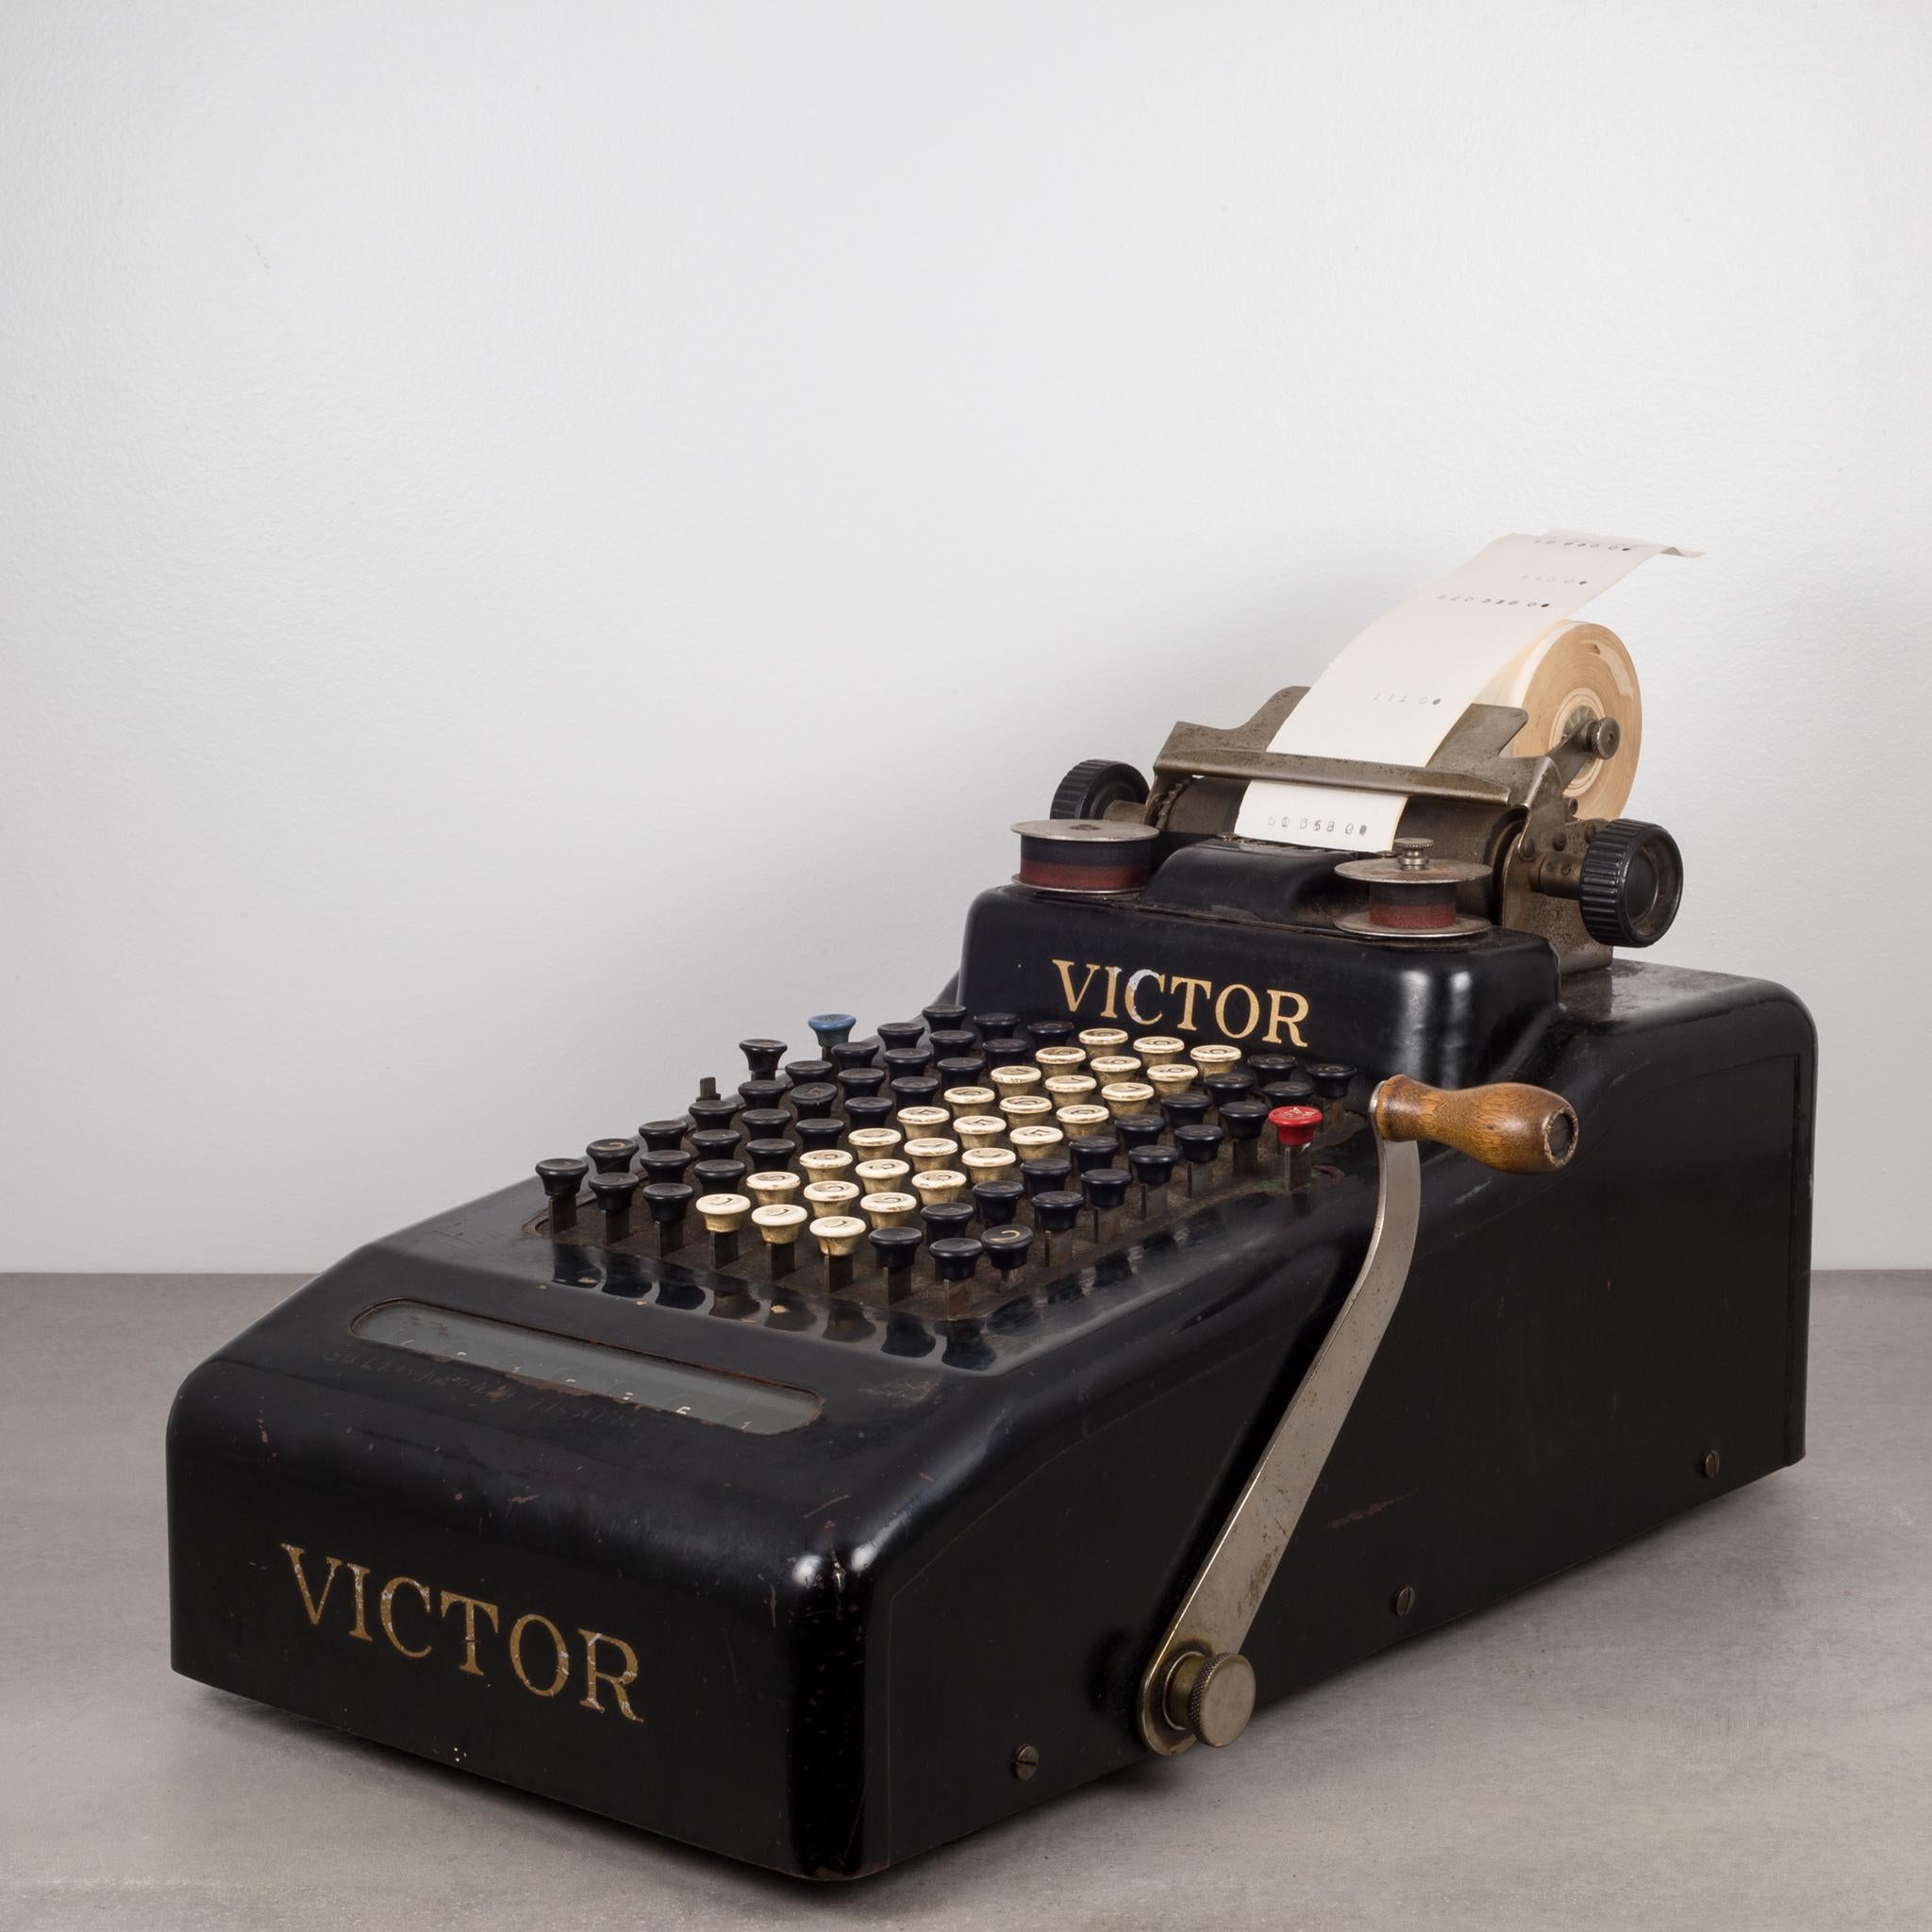 Antique steel and glass adding machine by Victor. The body is steel with a glass window that shows the calculated numbers. The lever has a wooden handle. Pull back lever for a very satisfying sound of numbers adding. The numbers change in the